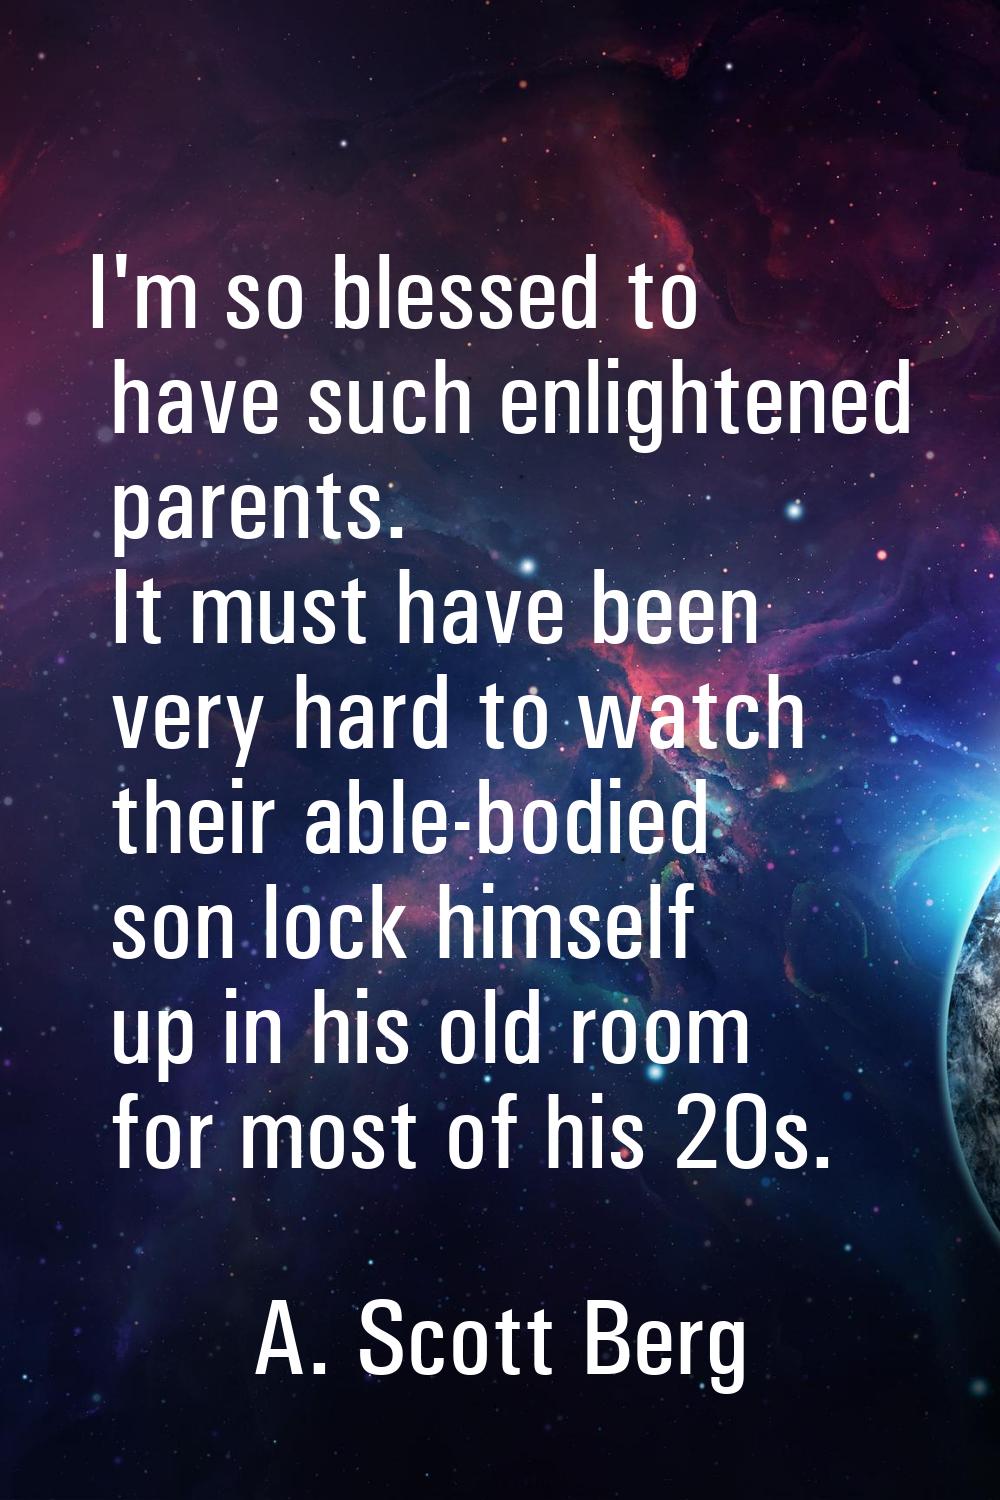 I'm so blessed to have such enlightened parents. It must have been very hard to watch their able-bo